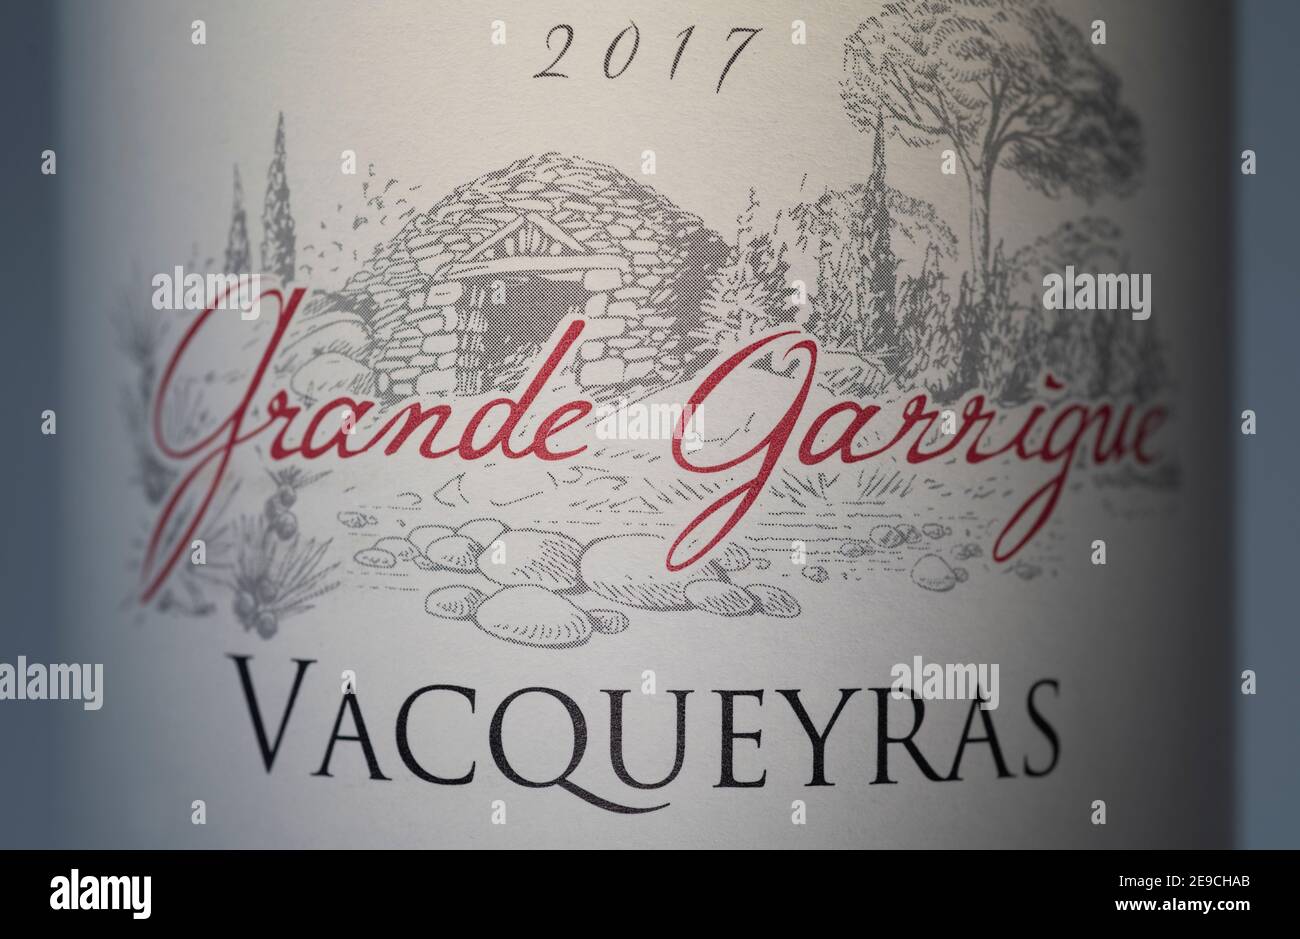 Grande Garrigue Vacqueyras 2017 French southern Rhone Valley Alain Jaume wine label closeup Stock Photo